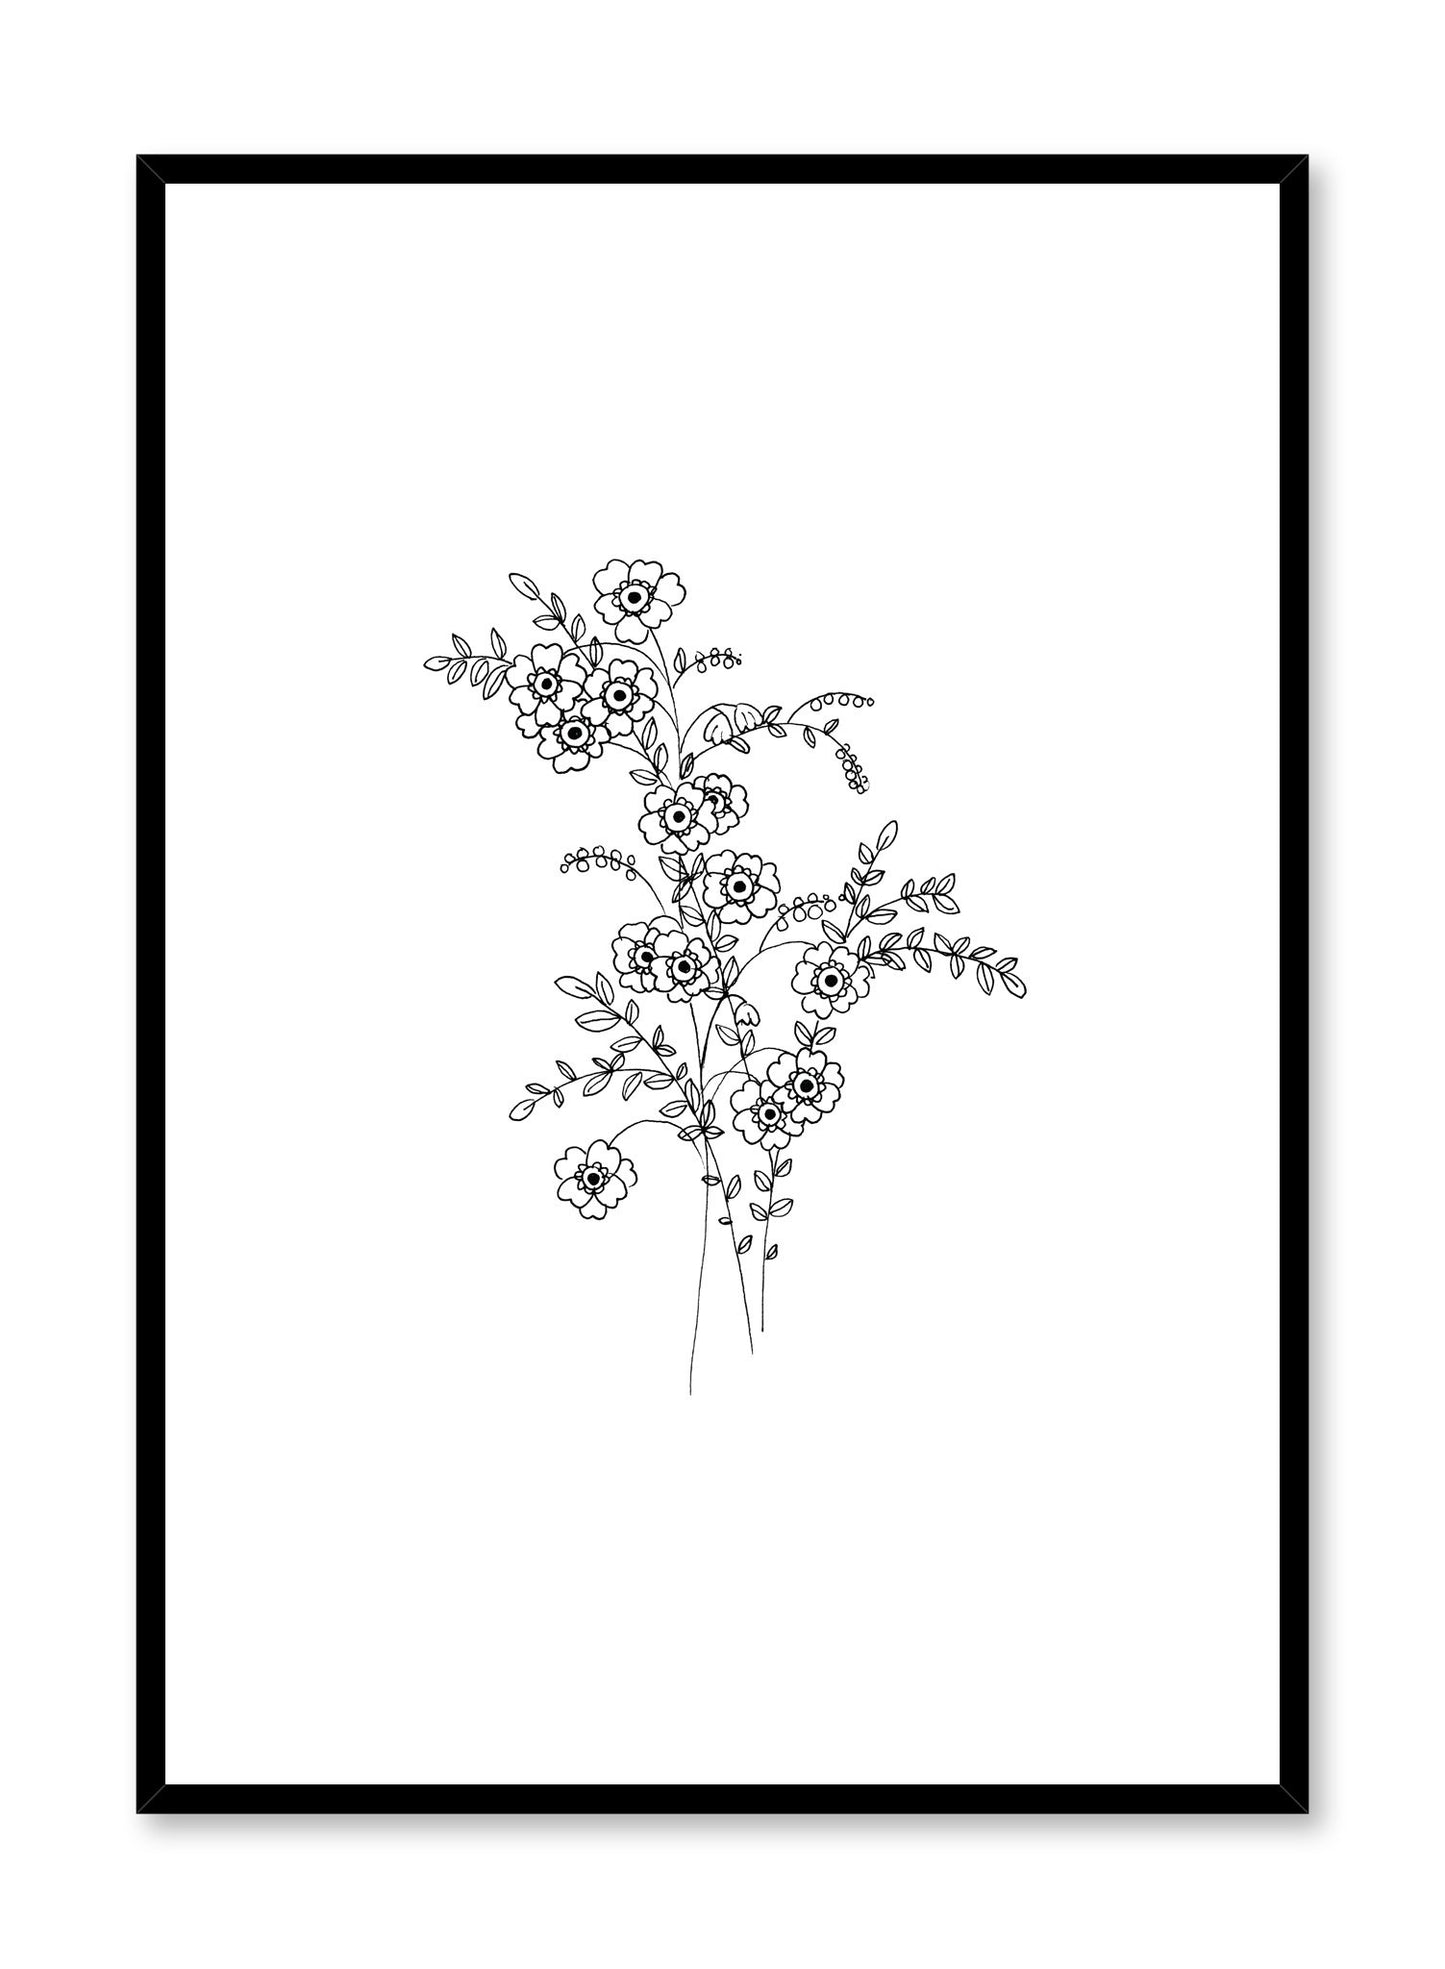 Modern minimalist poster by Opposite Wall with abstract line art illustration of Petite Petals